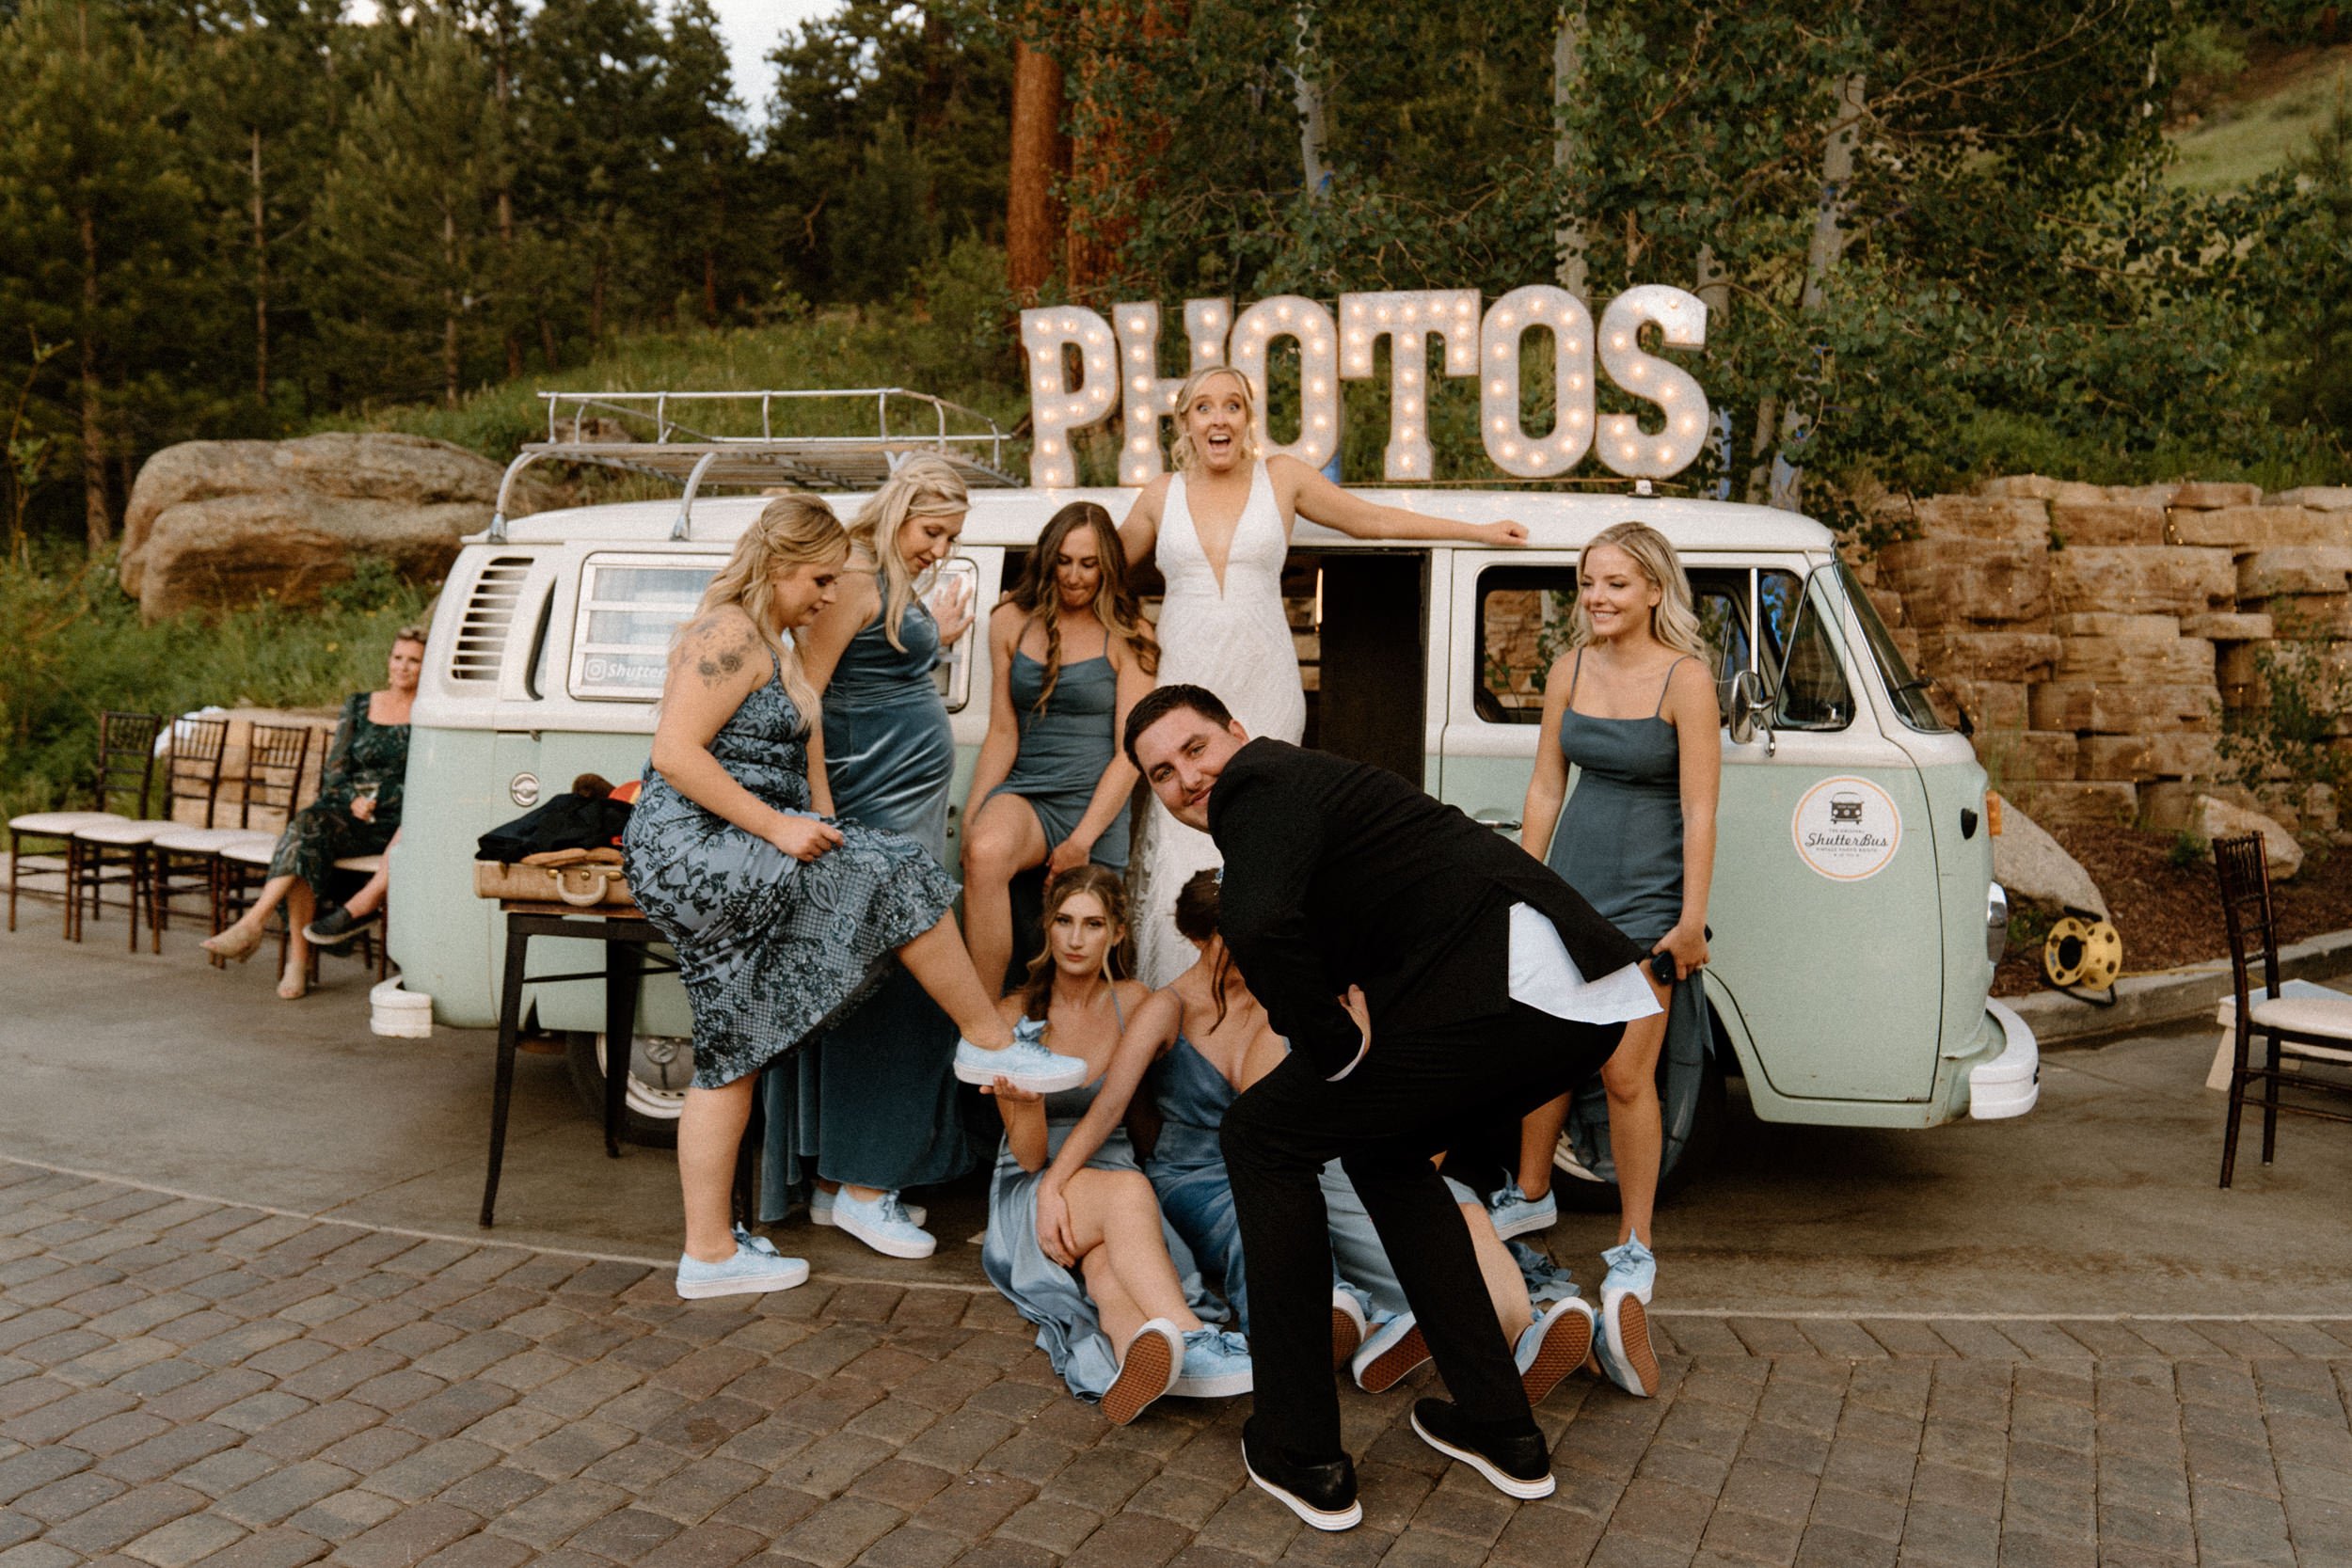 The bridal party and the groom pose in front of the photo booth bus